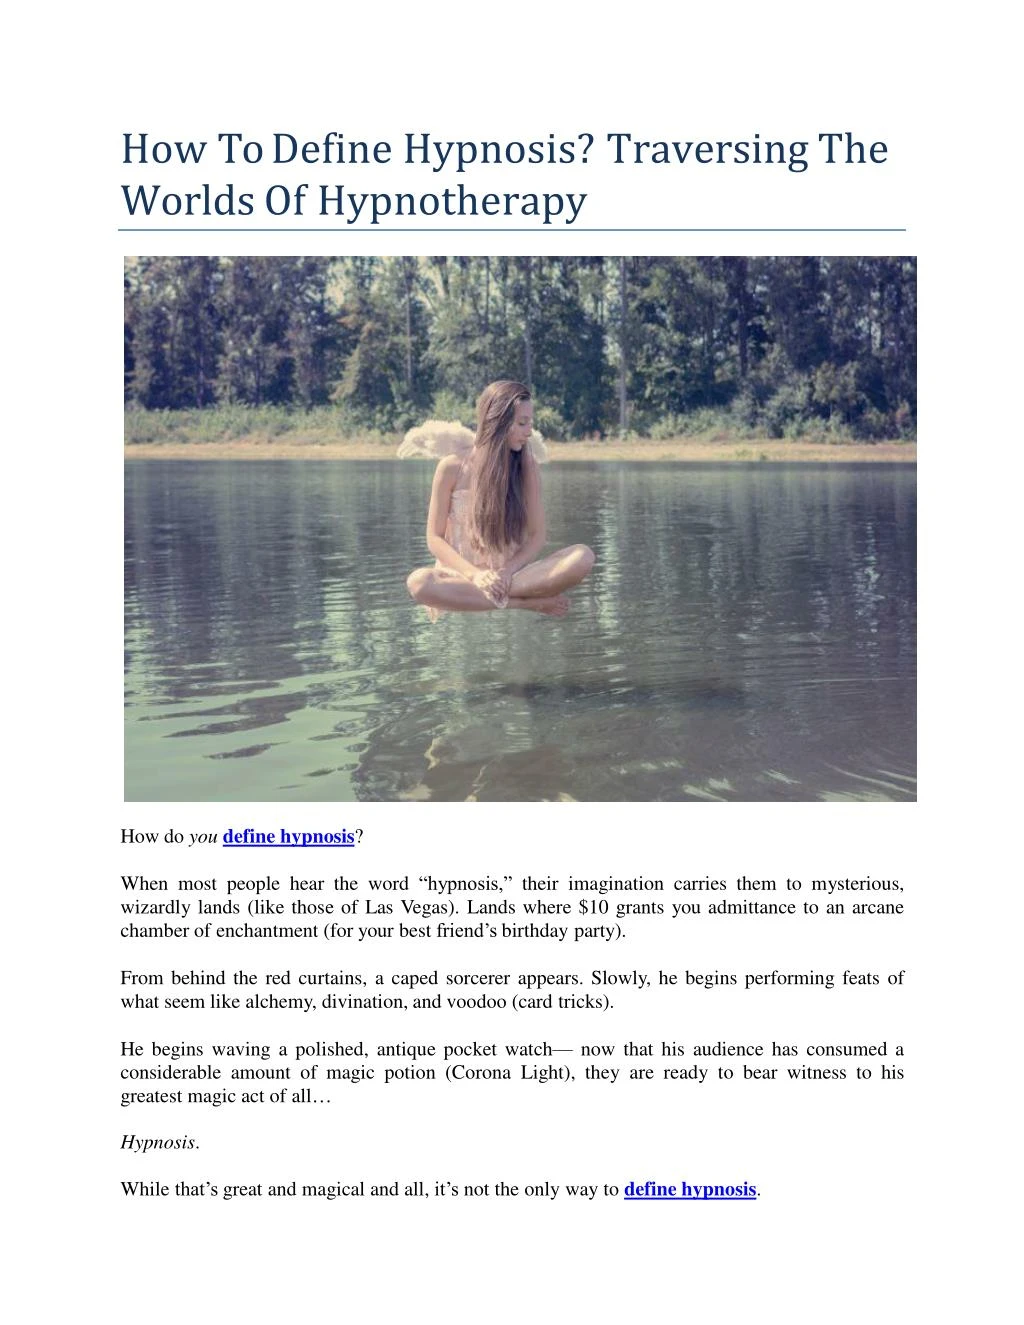 how to define hypnosis traversing the worlds of hypnotherapy